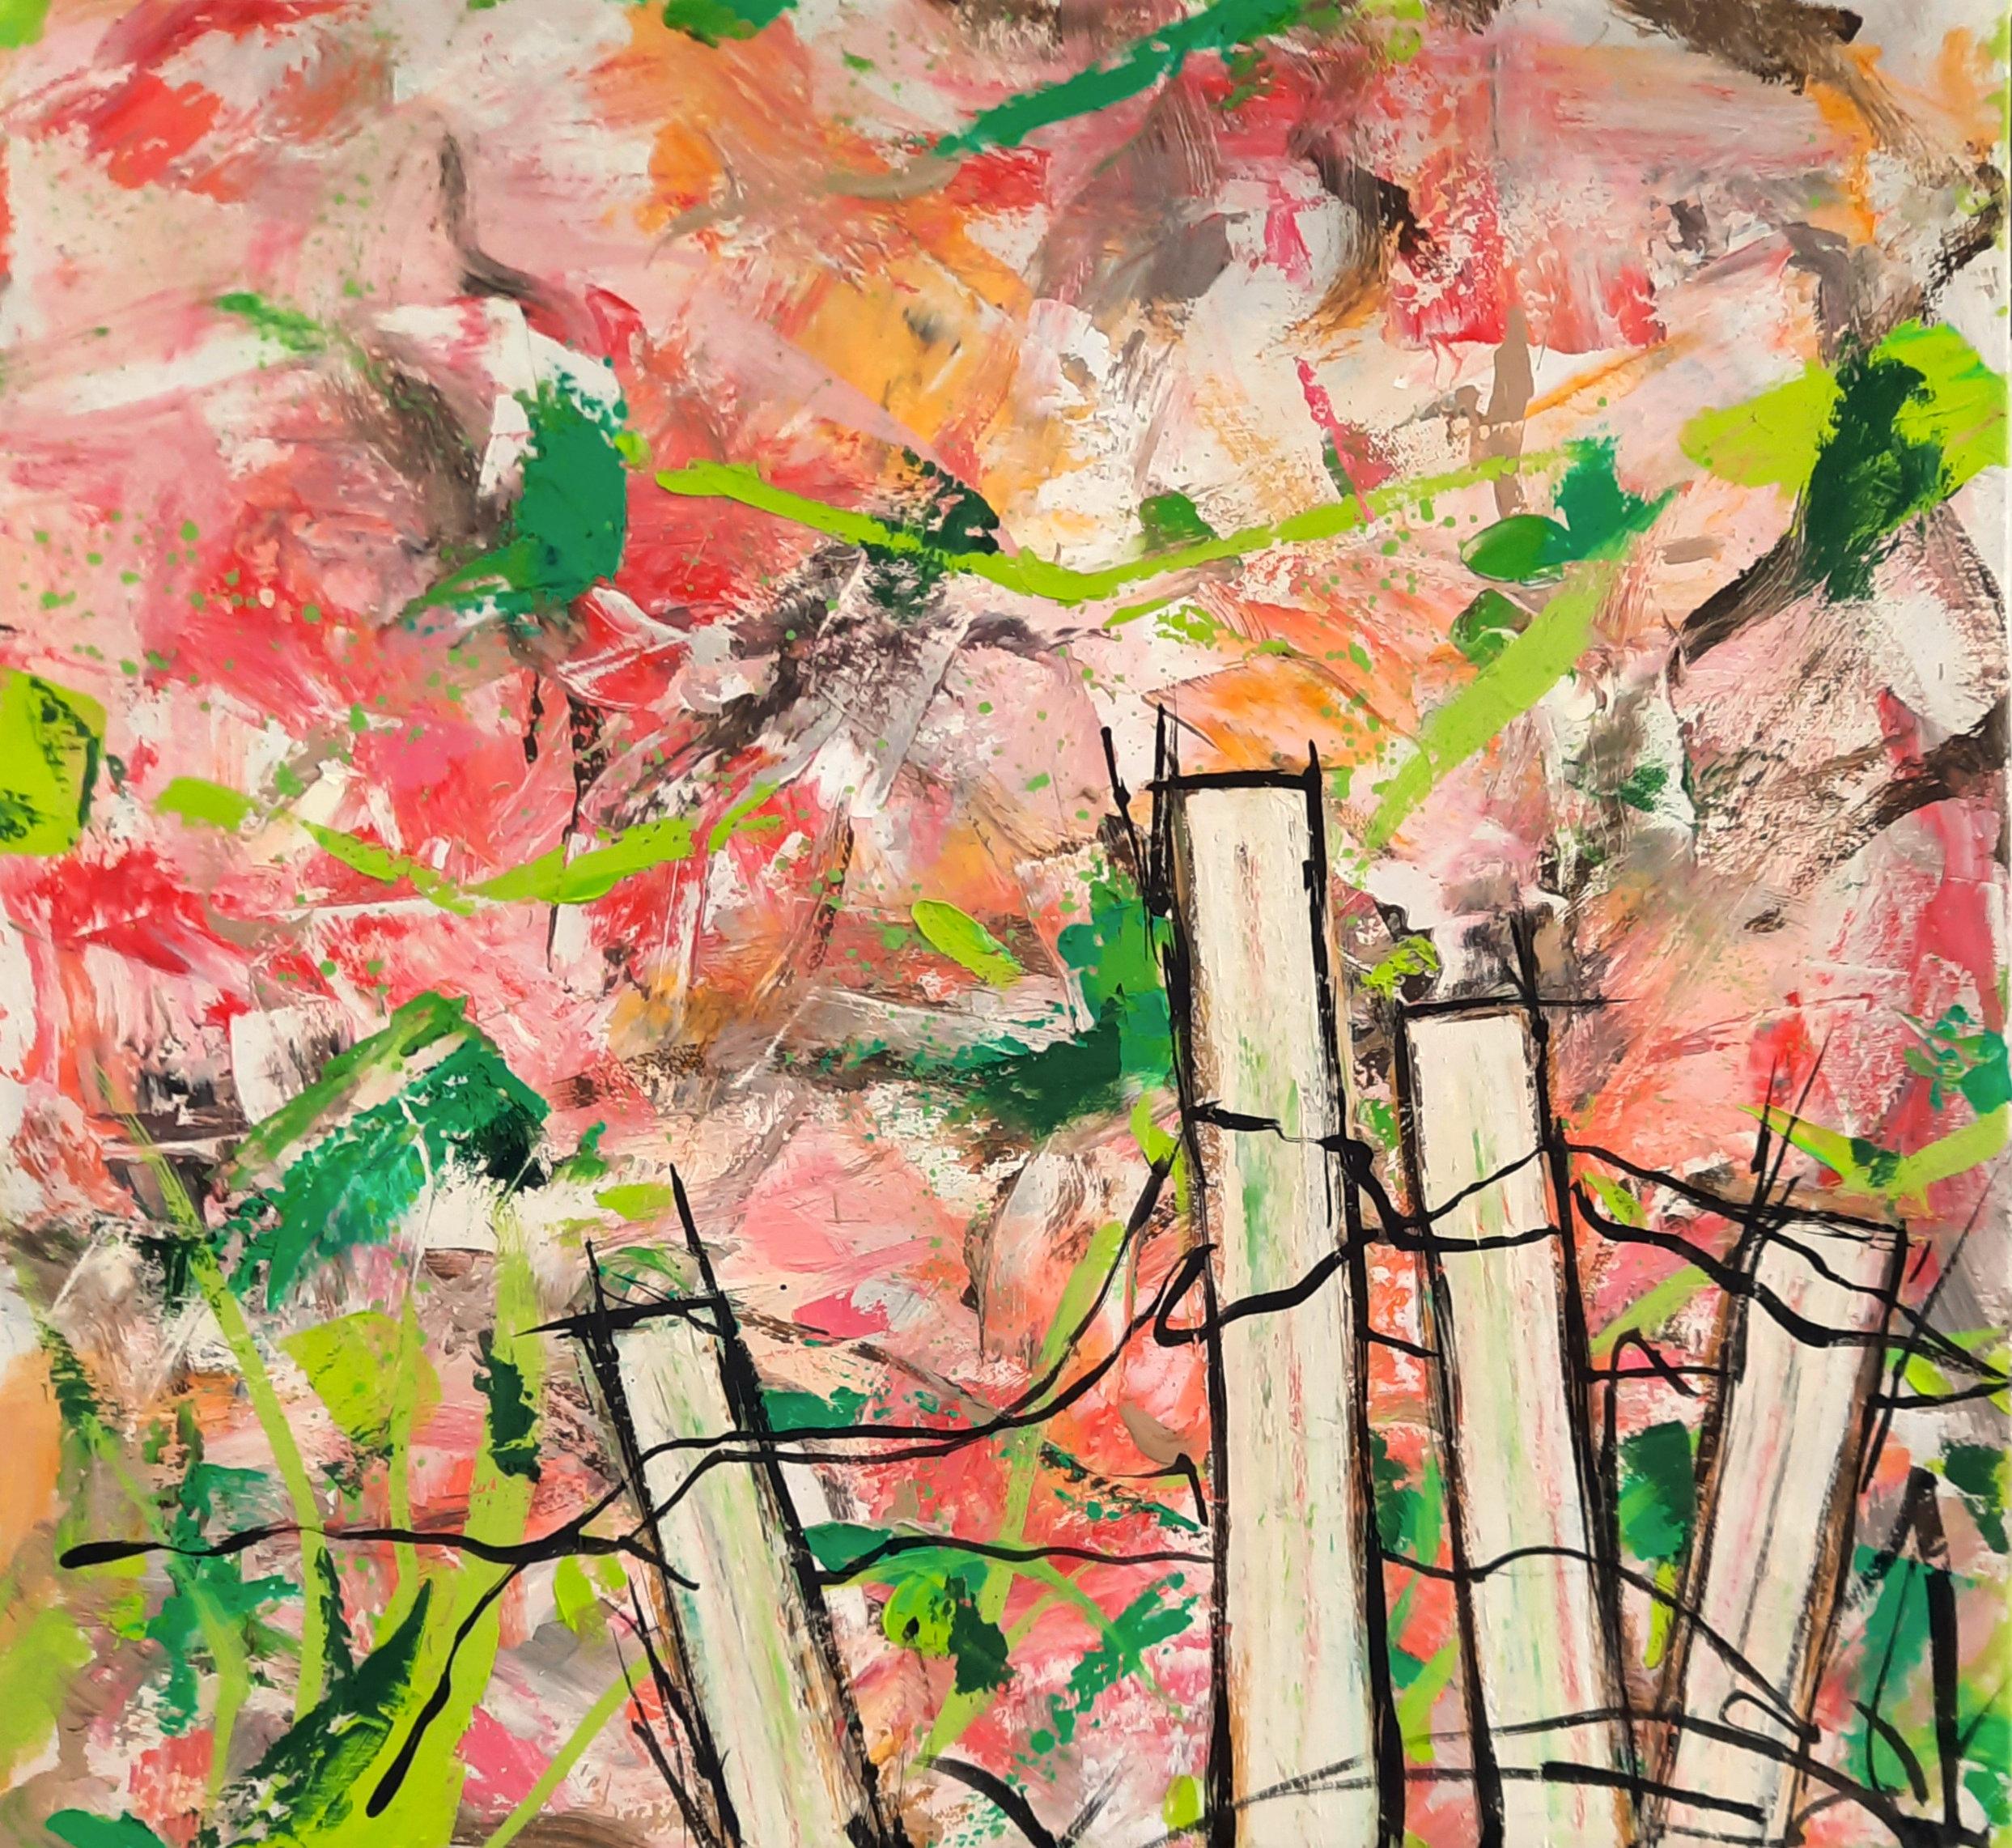 "A Garden View 2", abstract, garden, fence, pinks, greens, impasto, oil painting